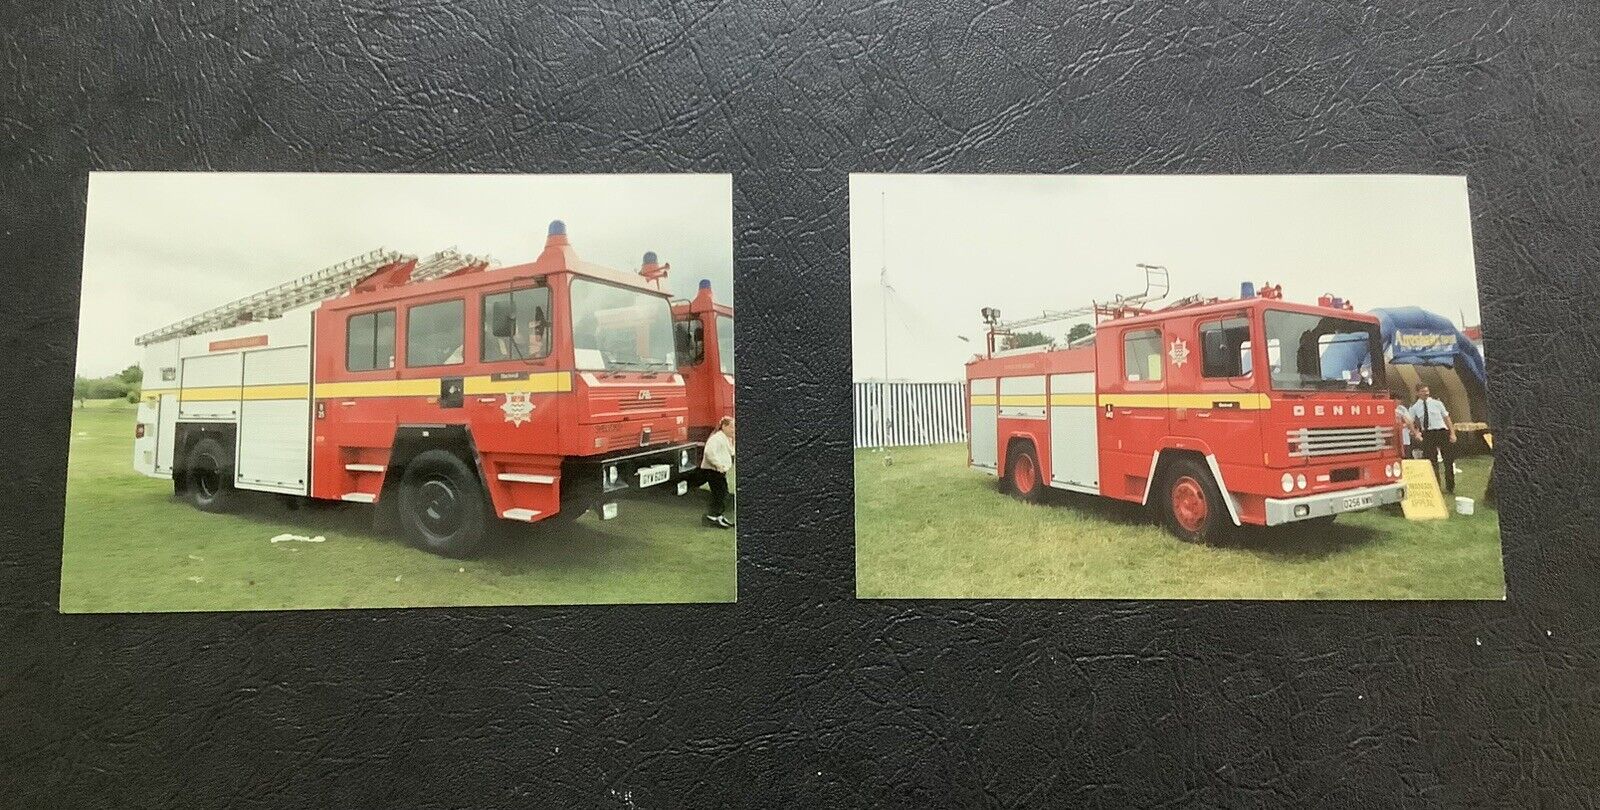 2 British Fire Truck, Apparatus Photos From The 1990’s-London Is Burning TV Show